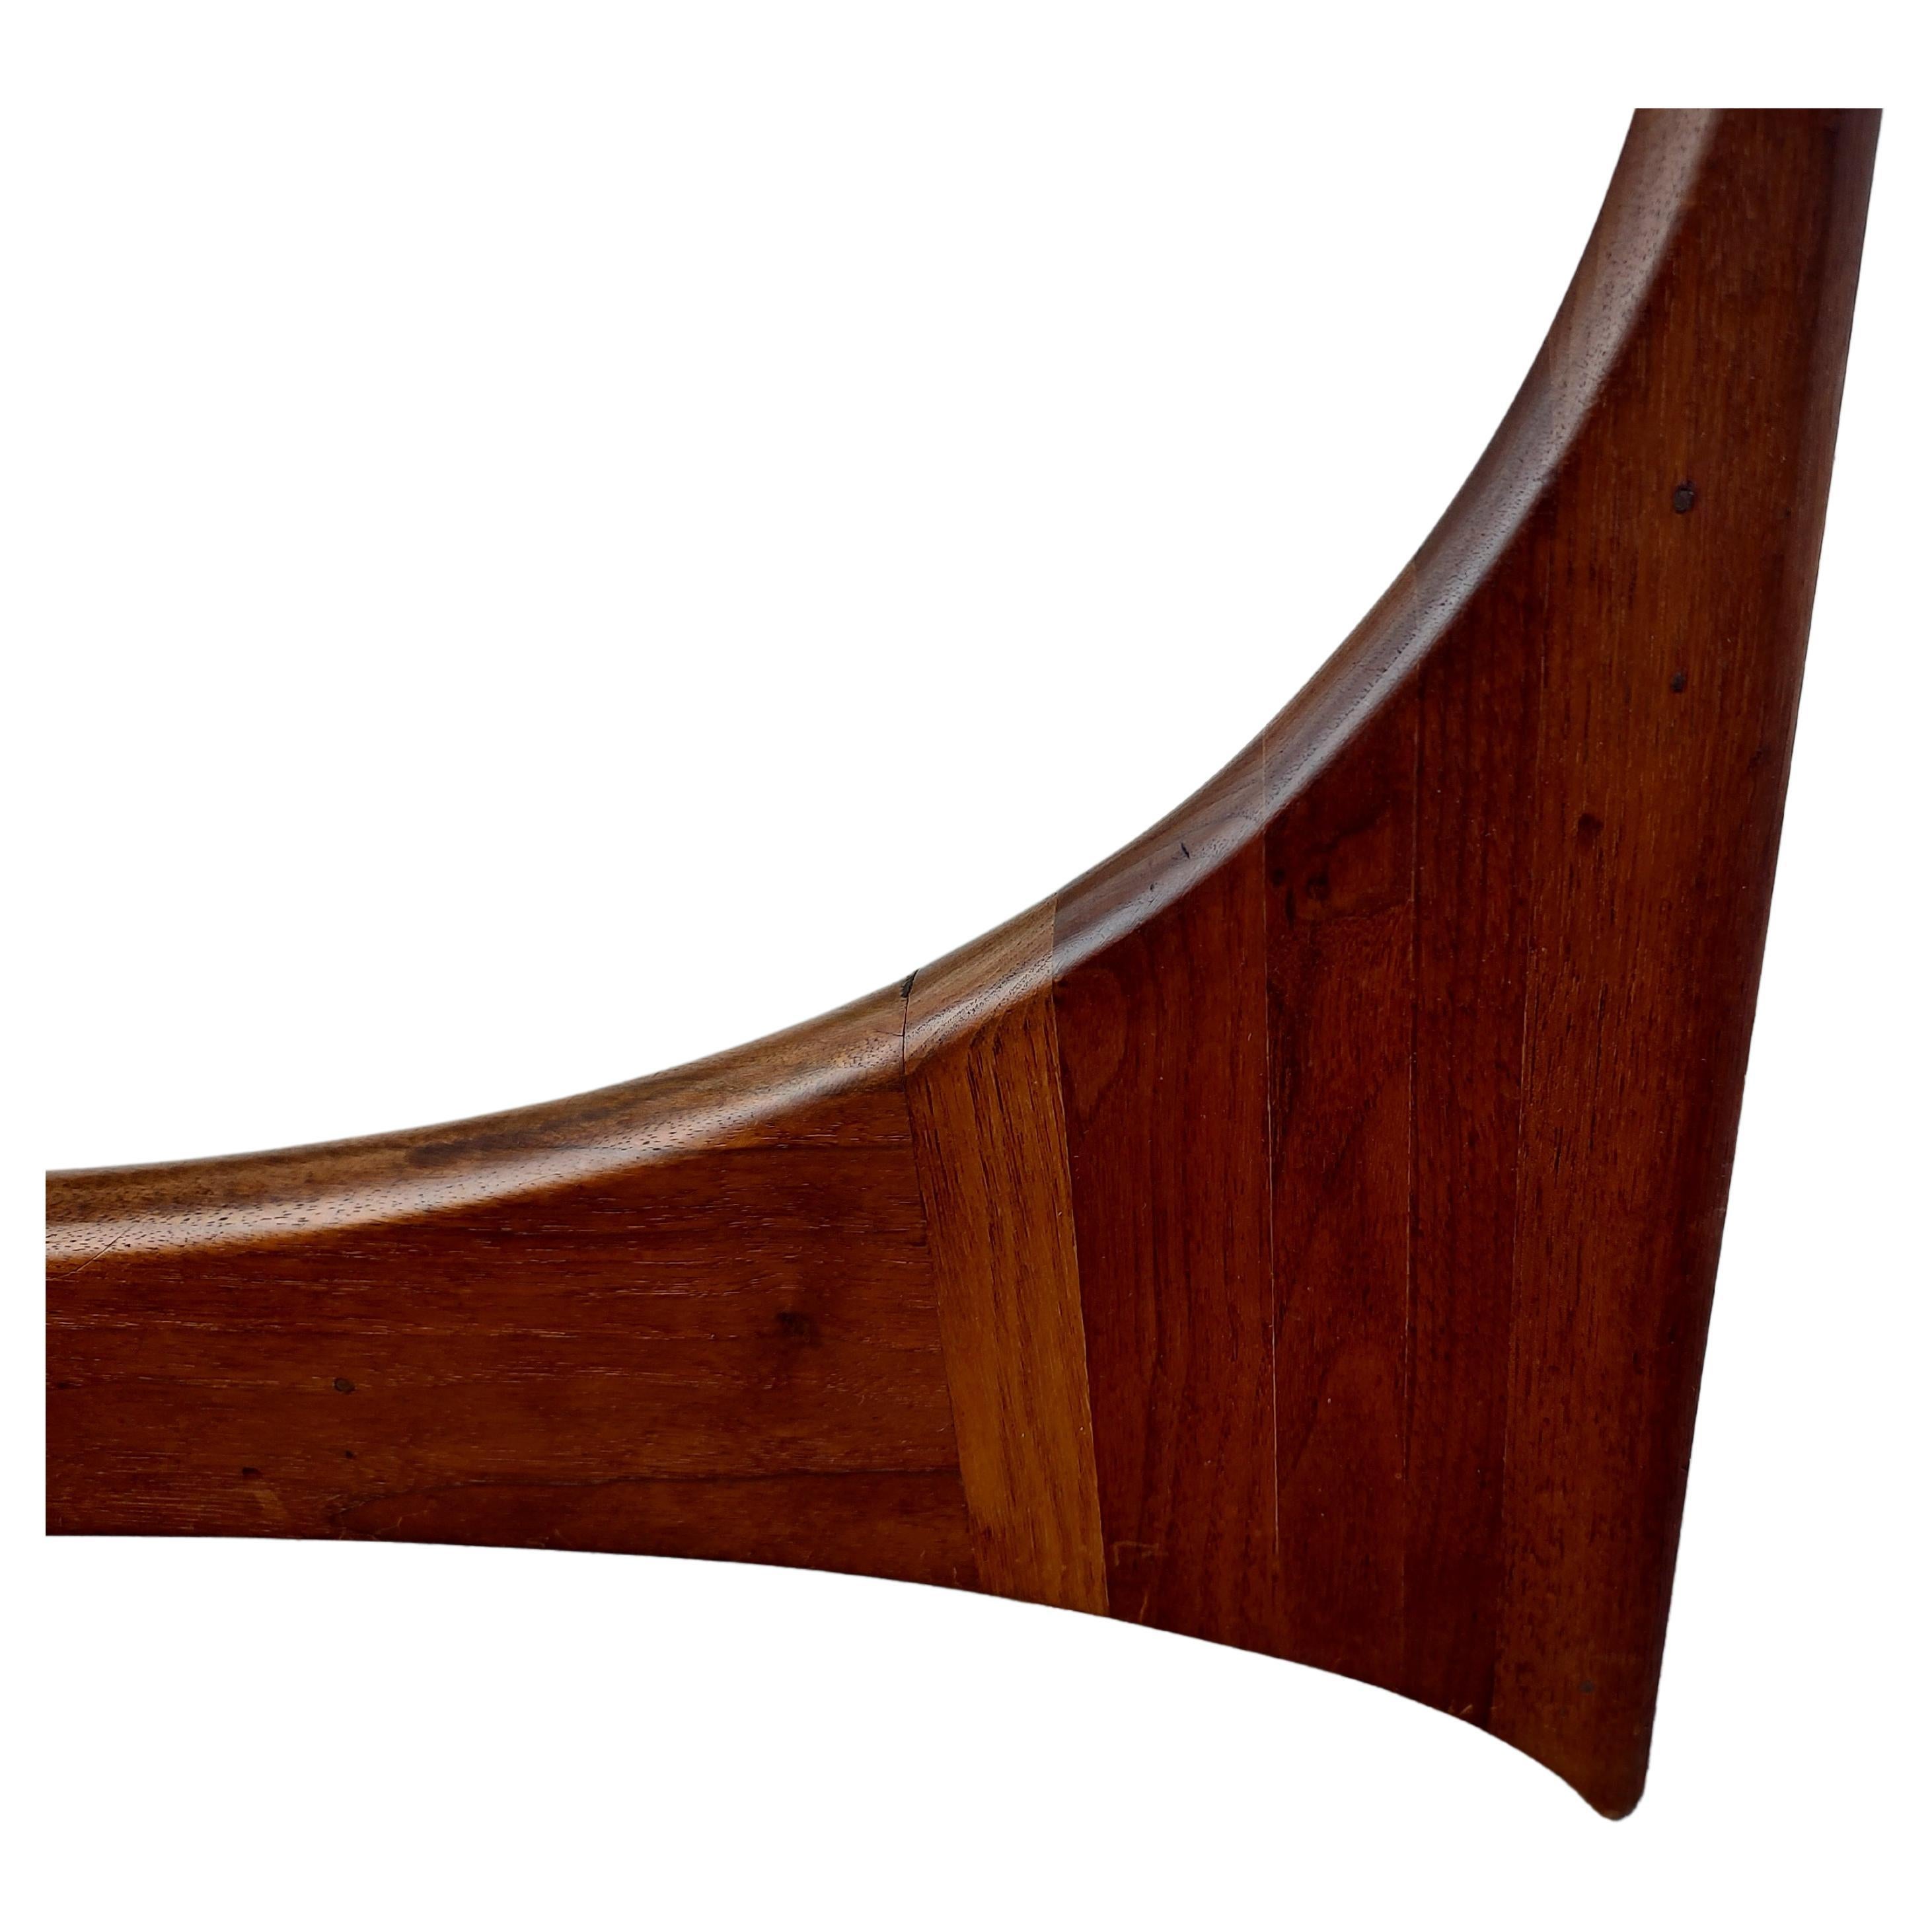 Hand-Crafted Mid-Century Modern Stingray Sculptural Cocktail Table by Adrian Pearsall 2399-TC For Sale